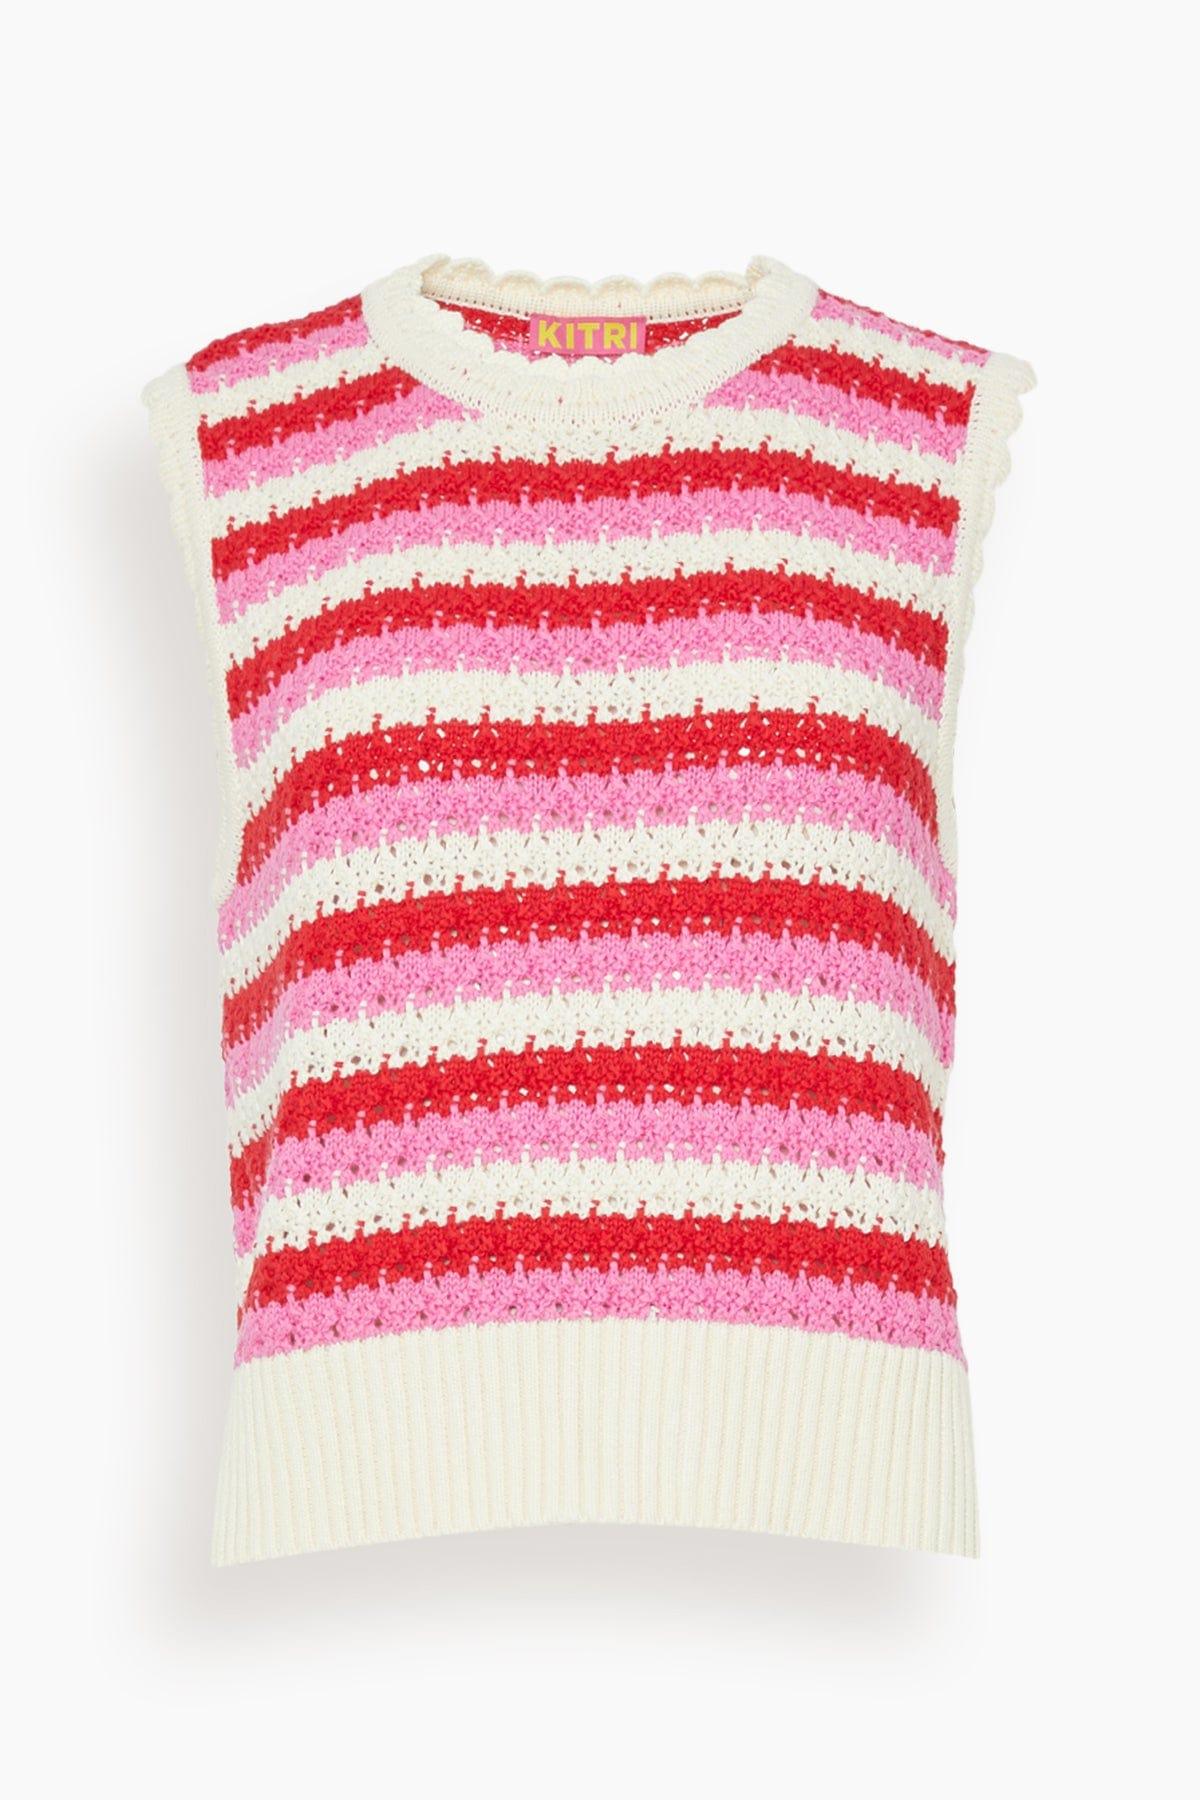 Kitri Marley Knit Top in Red | Lyst